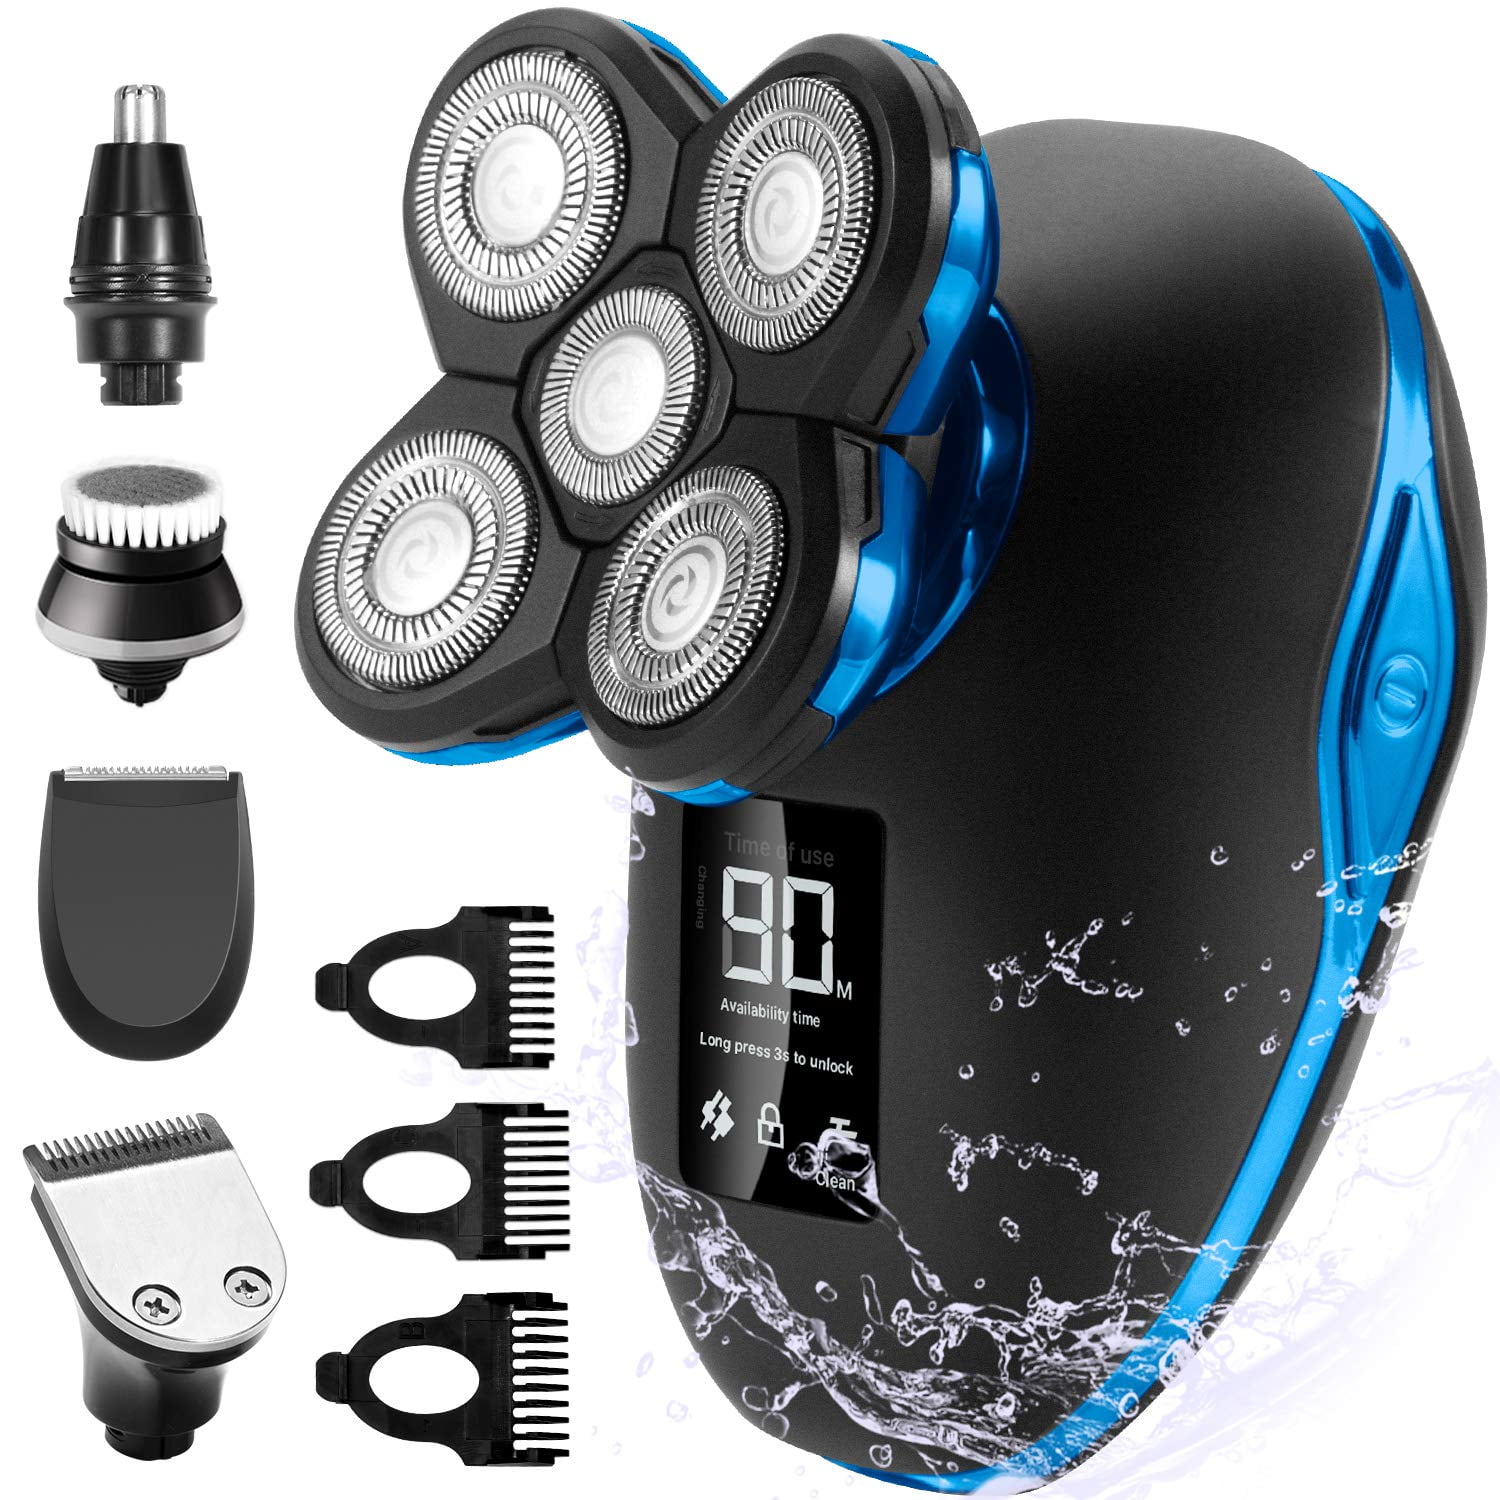 OriHea Head Shavers for Bald Men Wet Dry Electric Razor Bald Head Shaver  Rotary Cordless Hair Clippers Nose Hair Trimmer Waterproof USB Rechargeable  with 4D Floating 5 Razor Head - Walmart.com